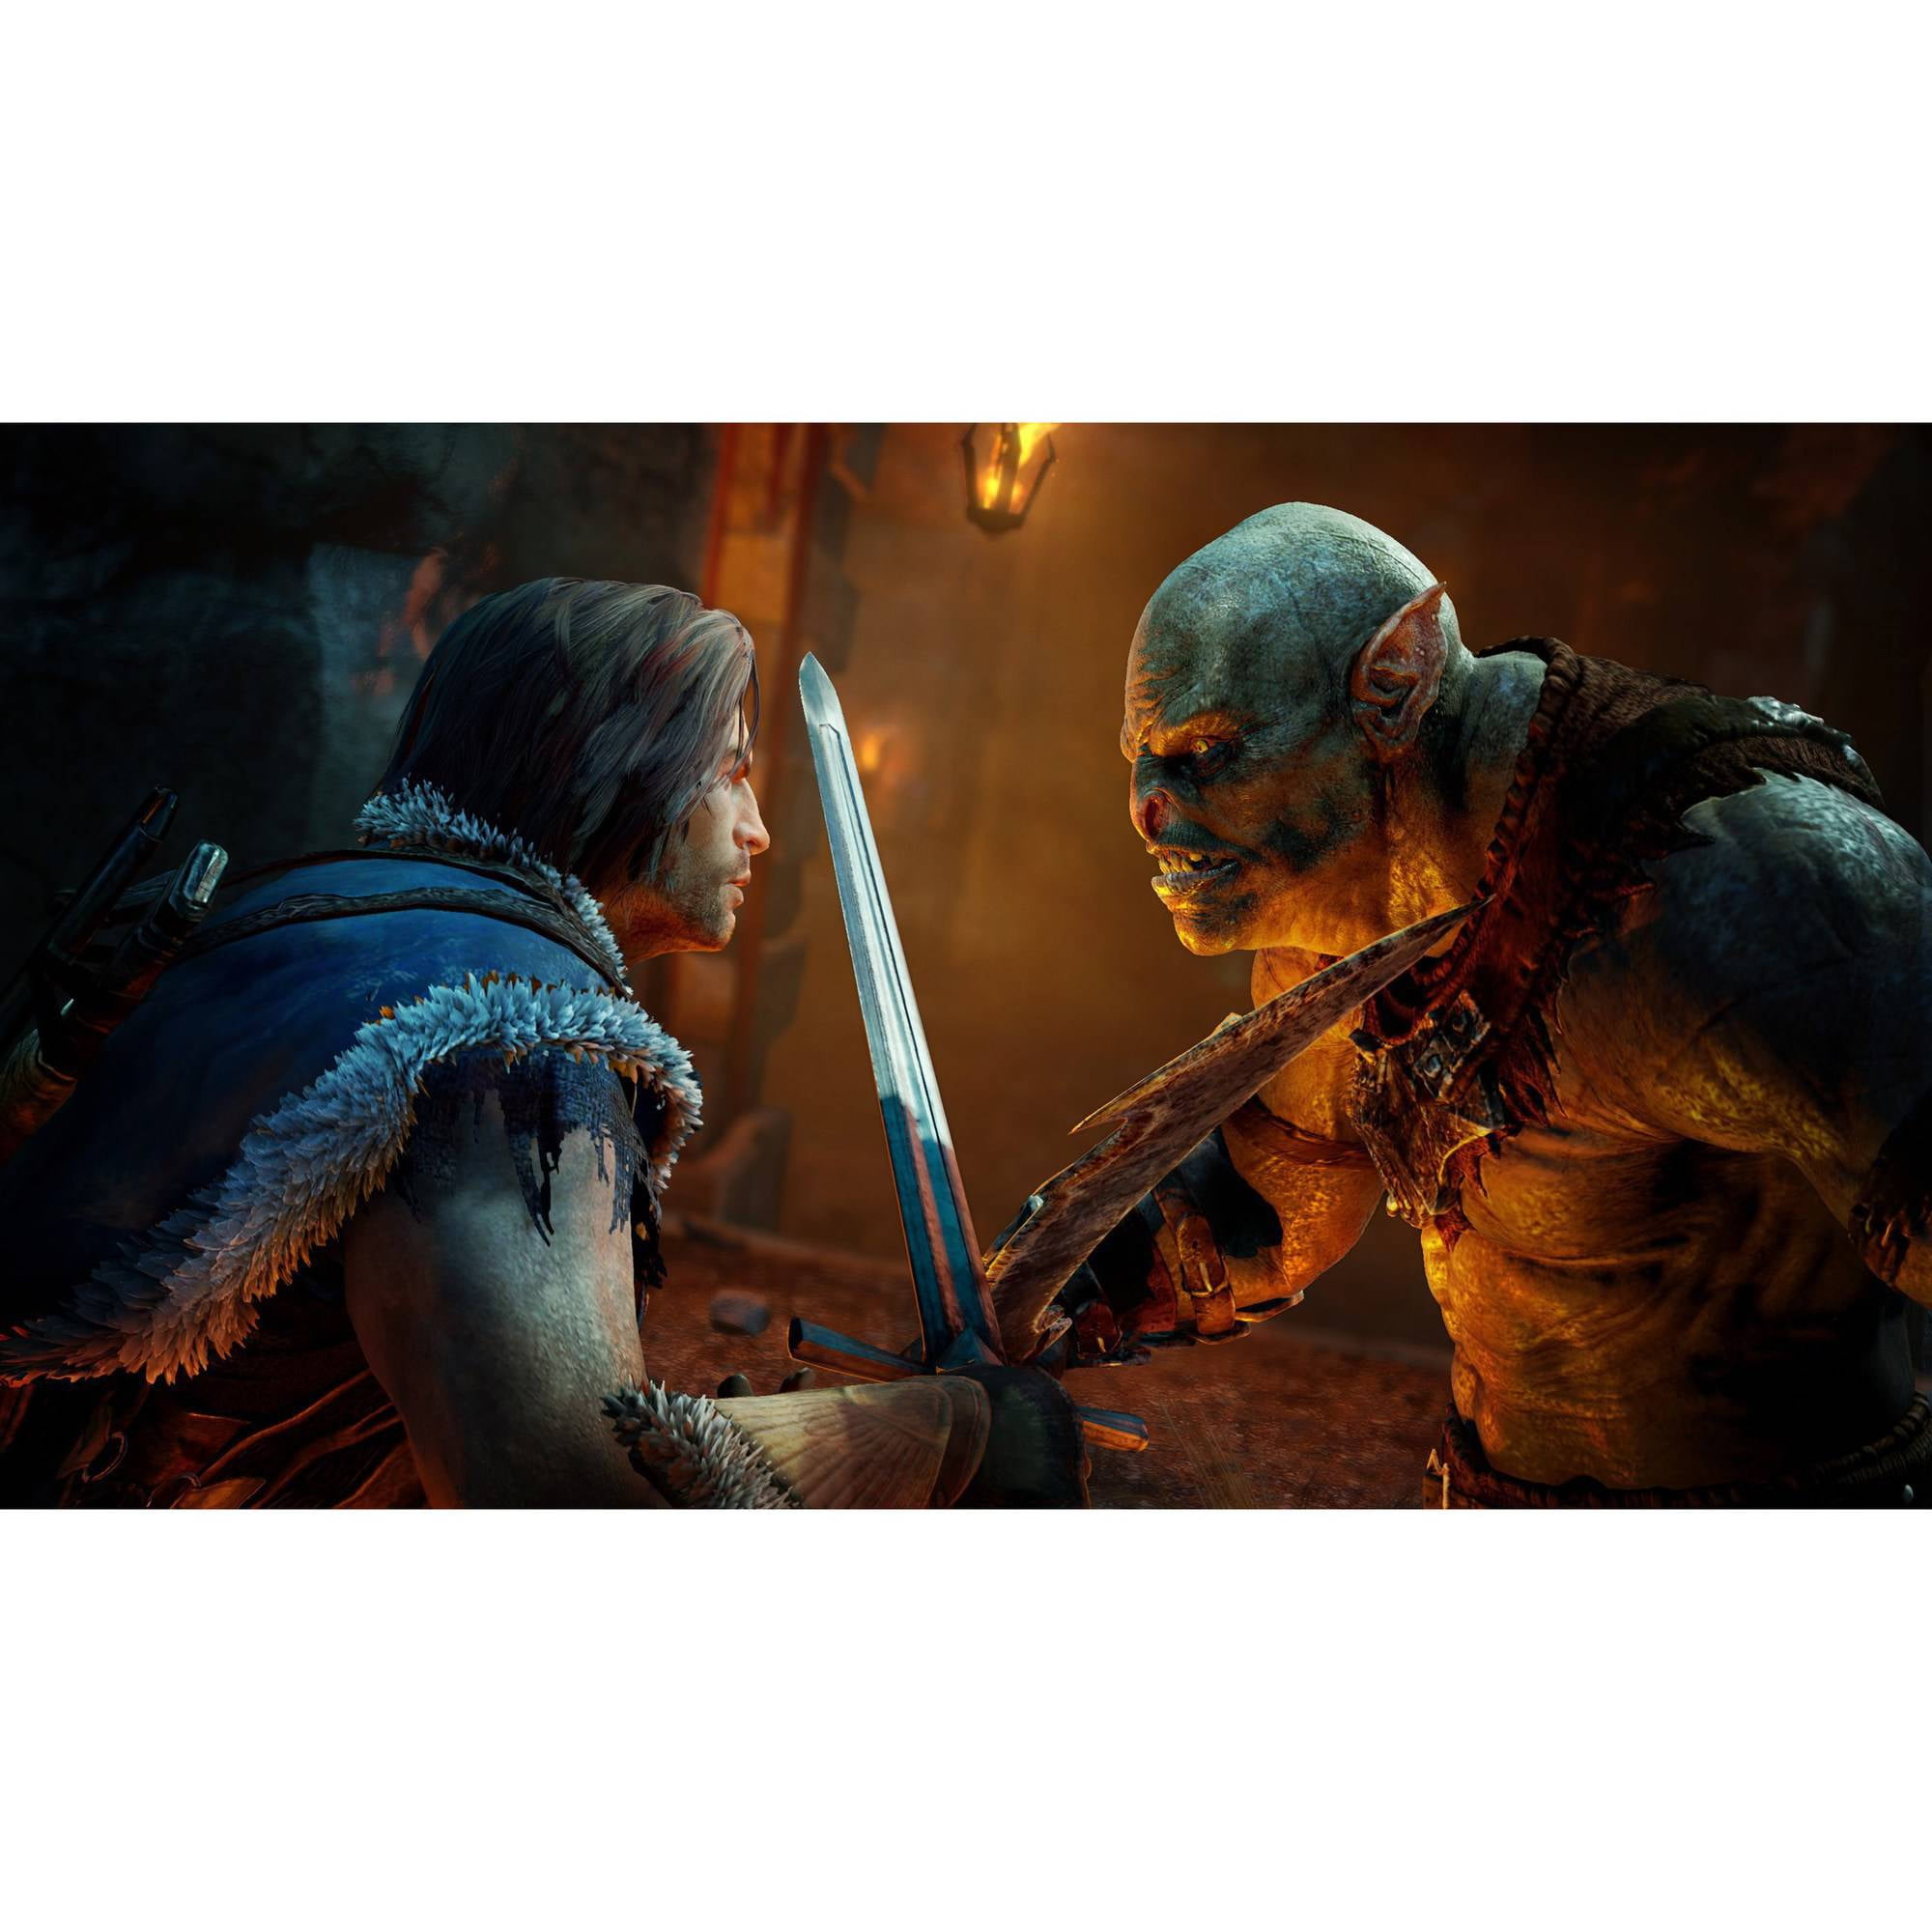 Daily Deal: Shadow of Mordor Is Only $4 On Xbox One - Gameranx